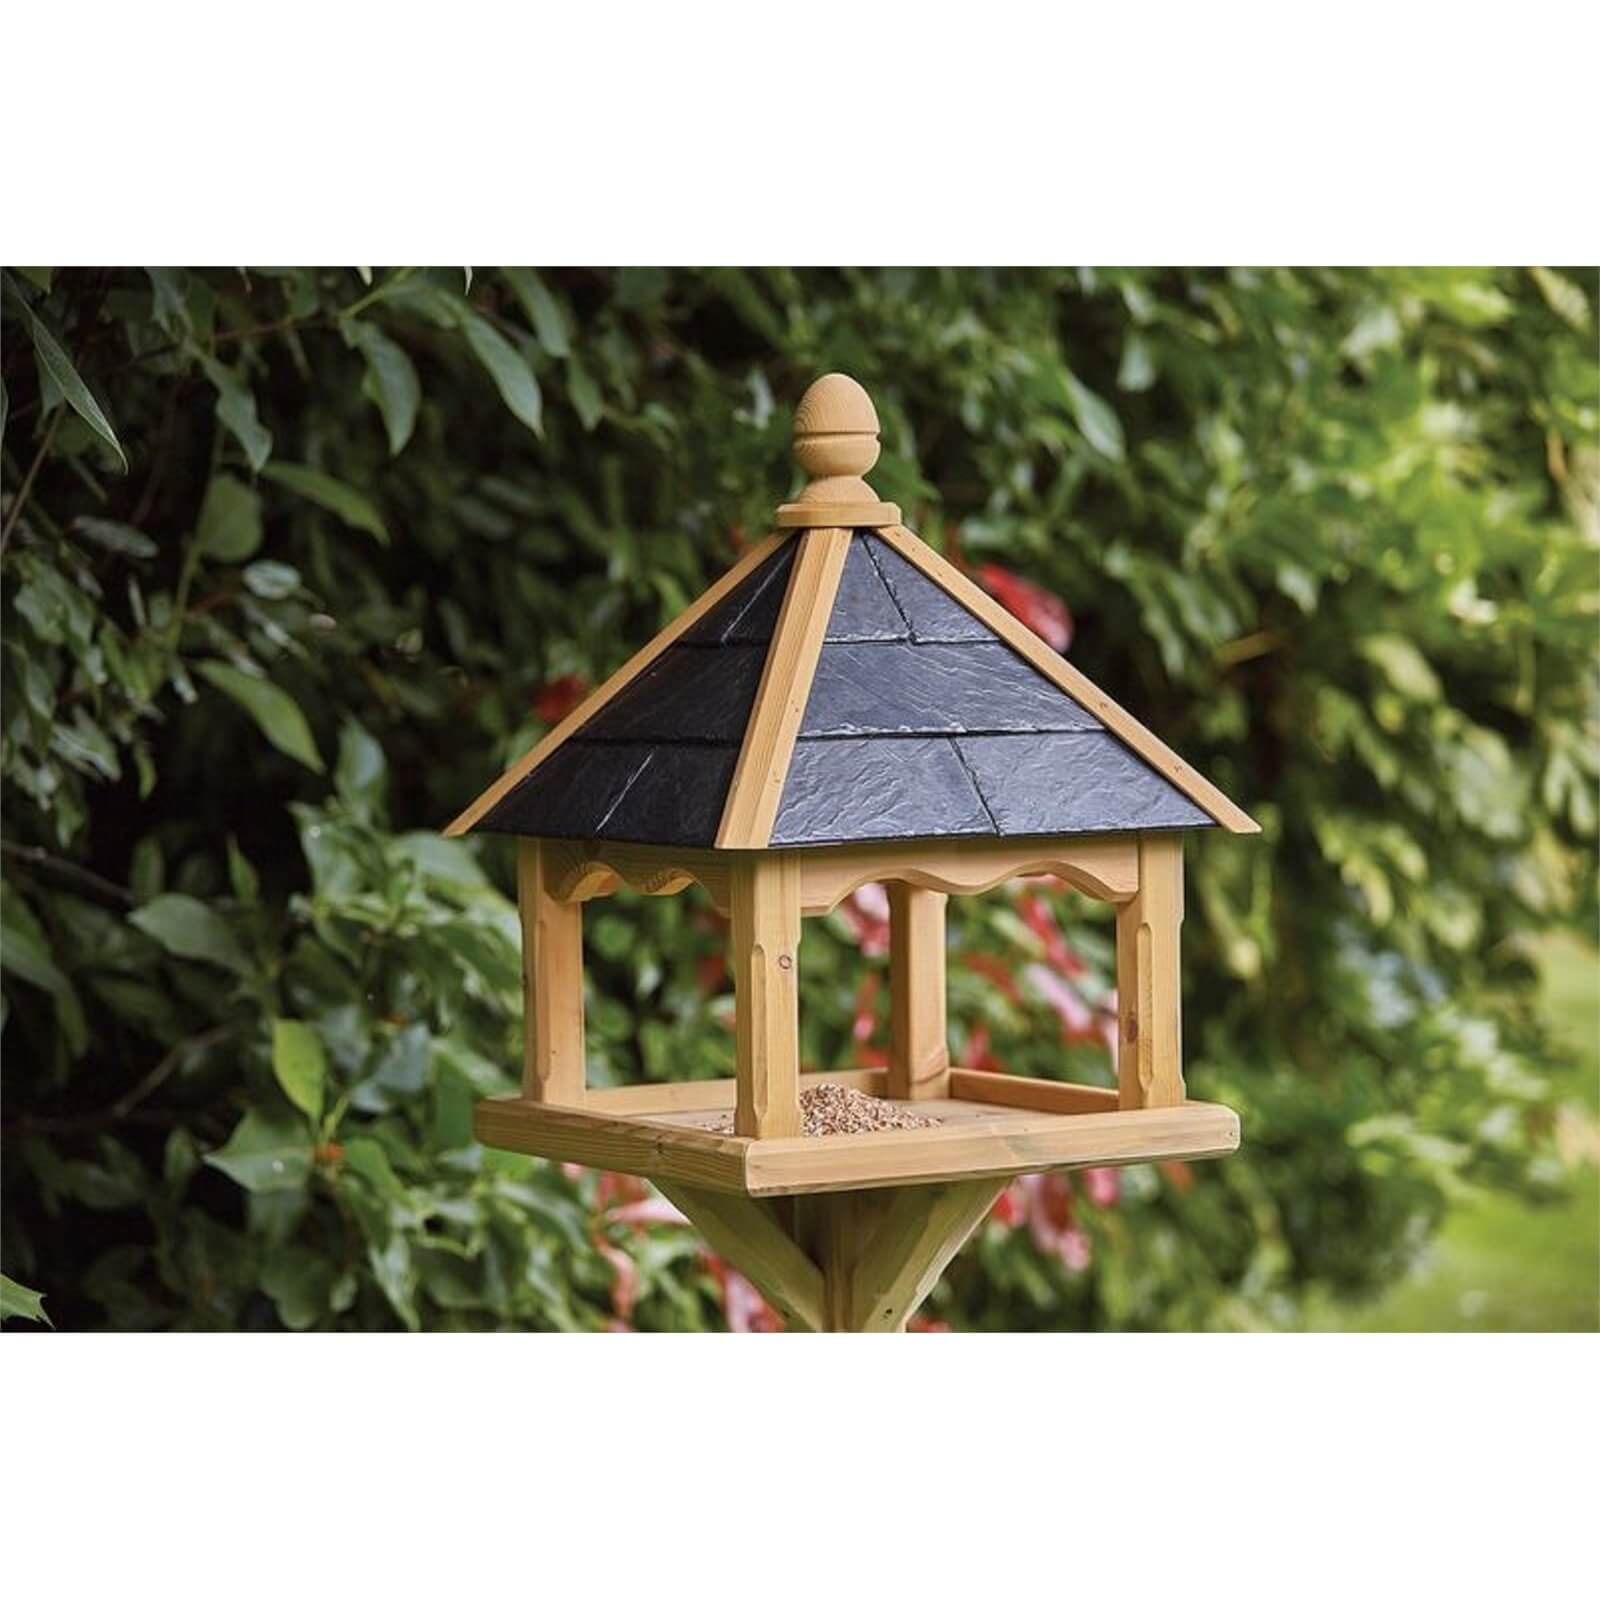 RHS Anchor Fast Square Bird Table Slate Roof